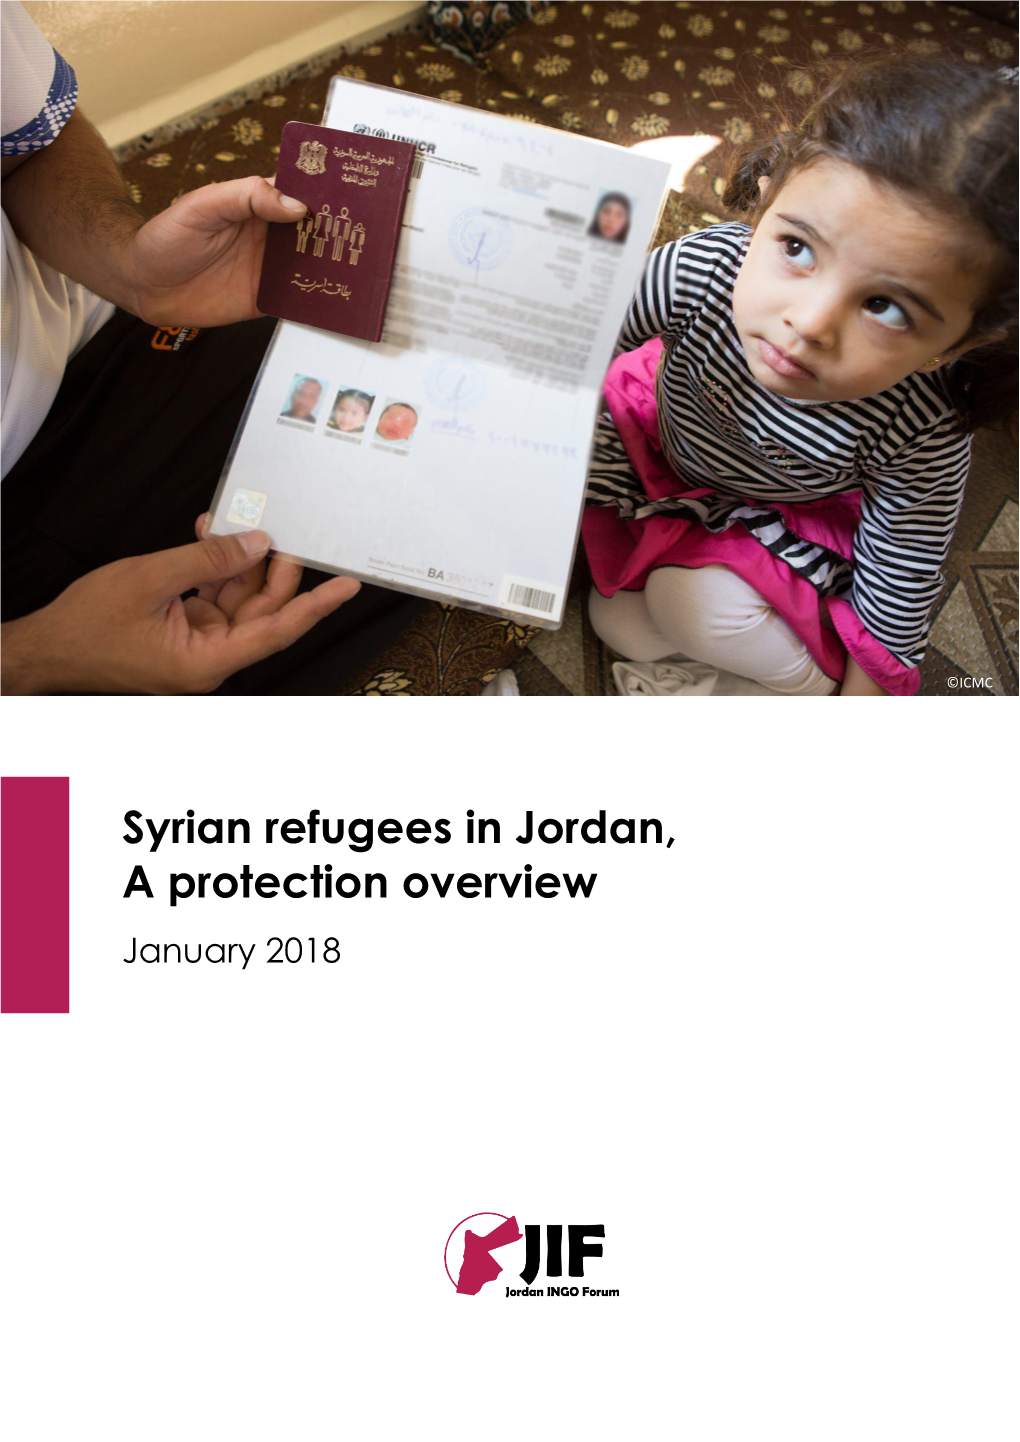 Syrian Refugees in Jordan, a Protection Overview